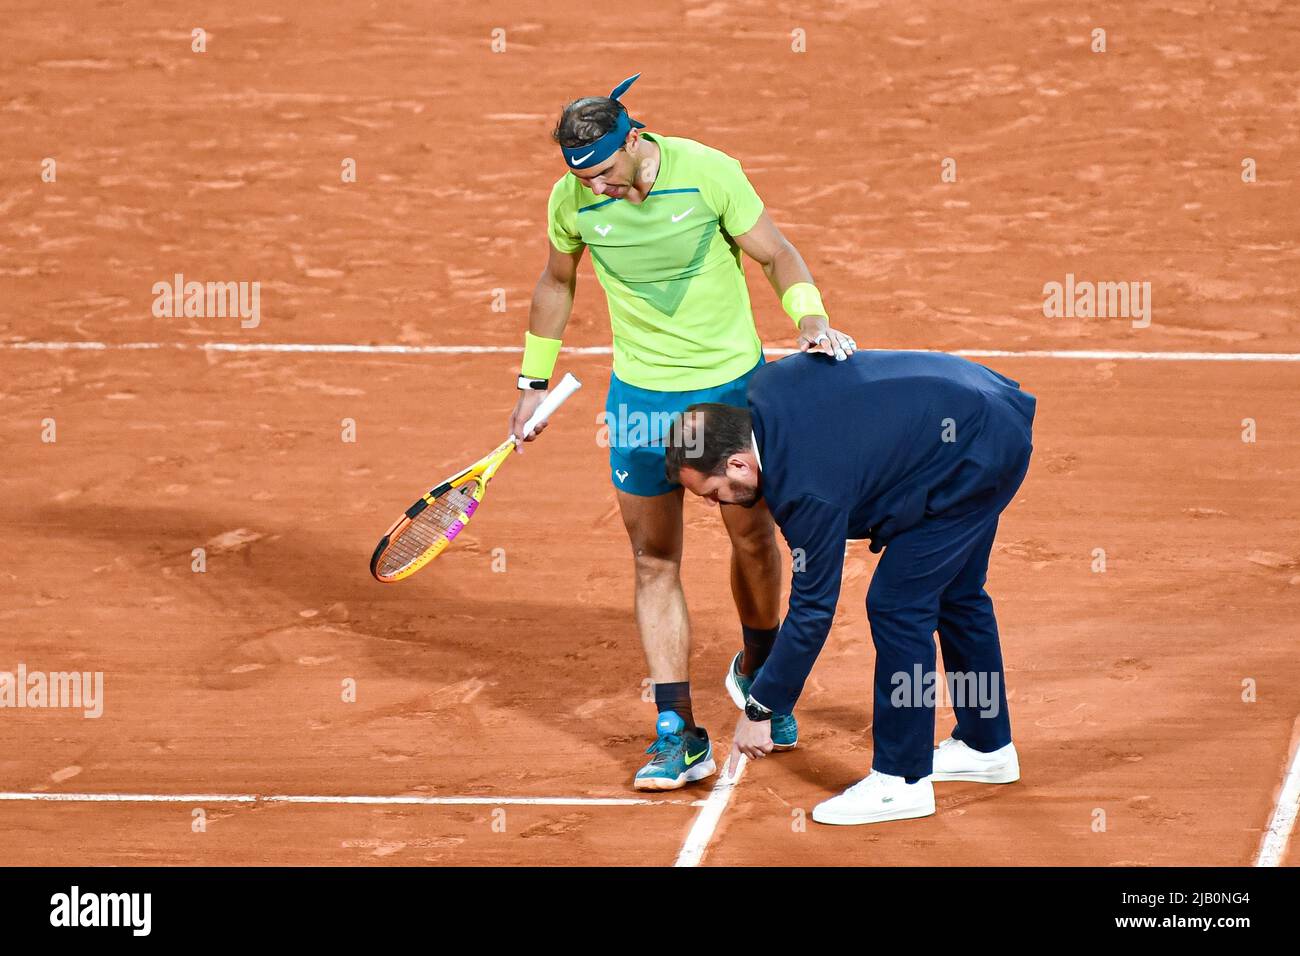 Rafael Nadal of Spain and the chair umpire during the French Open semifinal against Novak Djokovic, Grand Slam tennis tournament on May 31, 2022 at Roland-Garros stadium in Paris, France